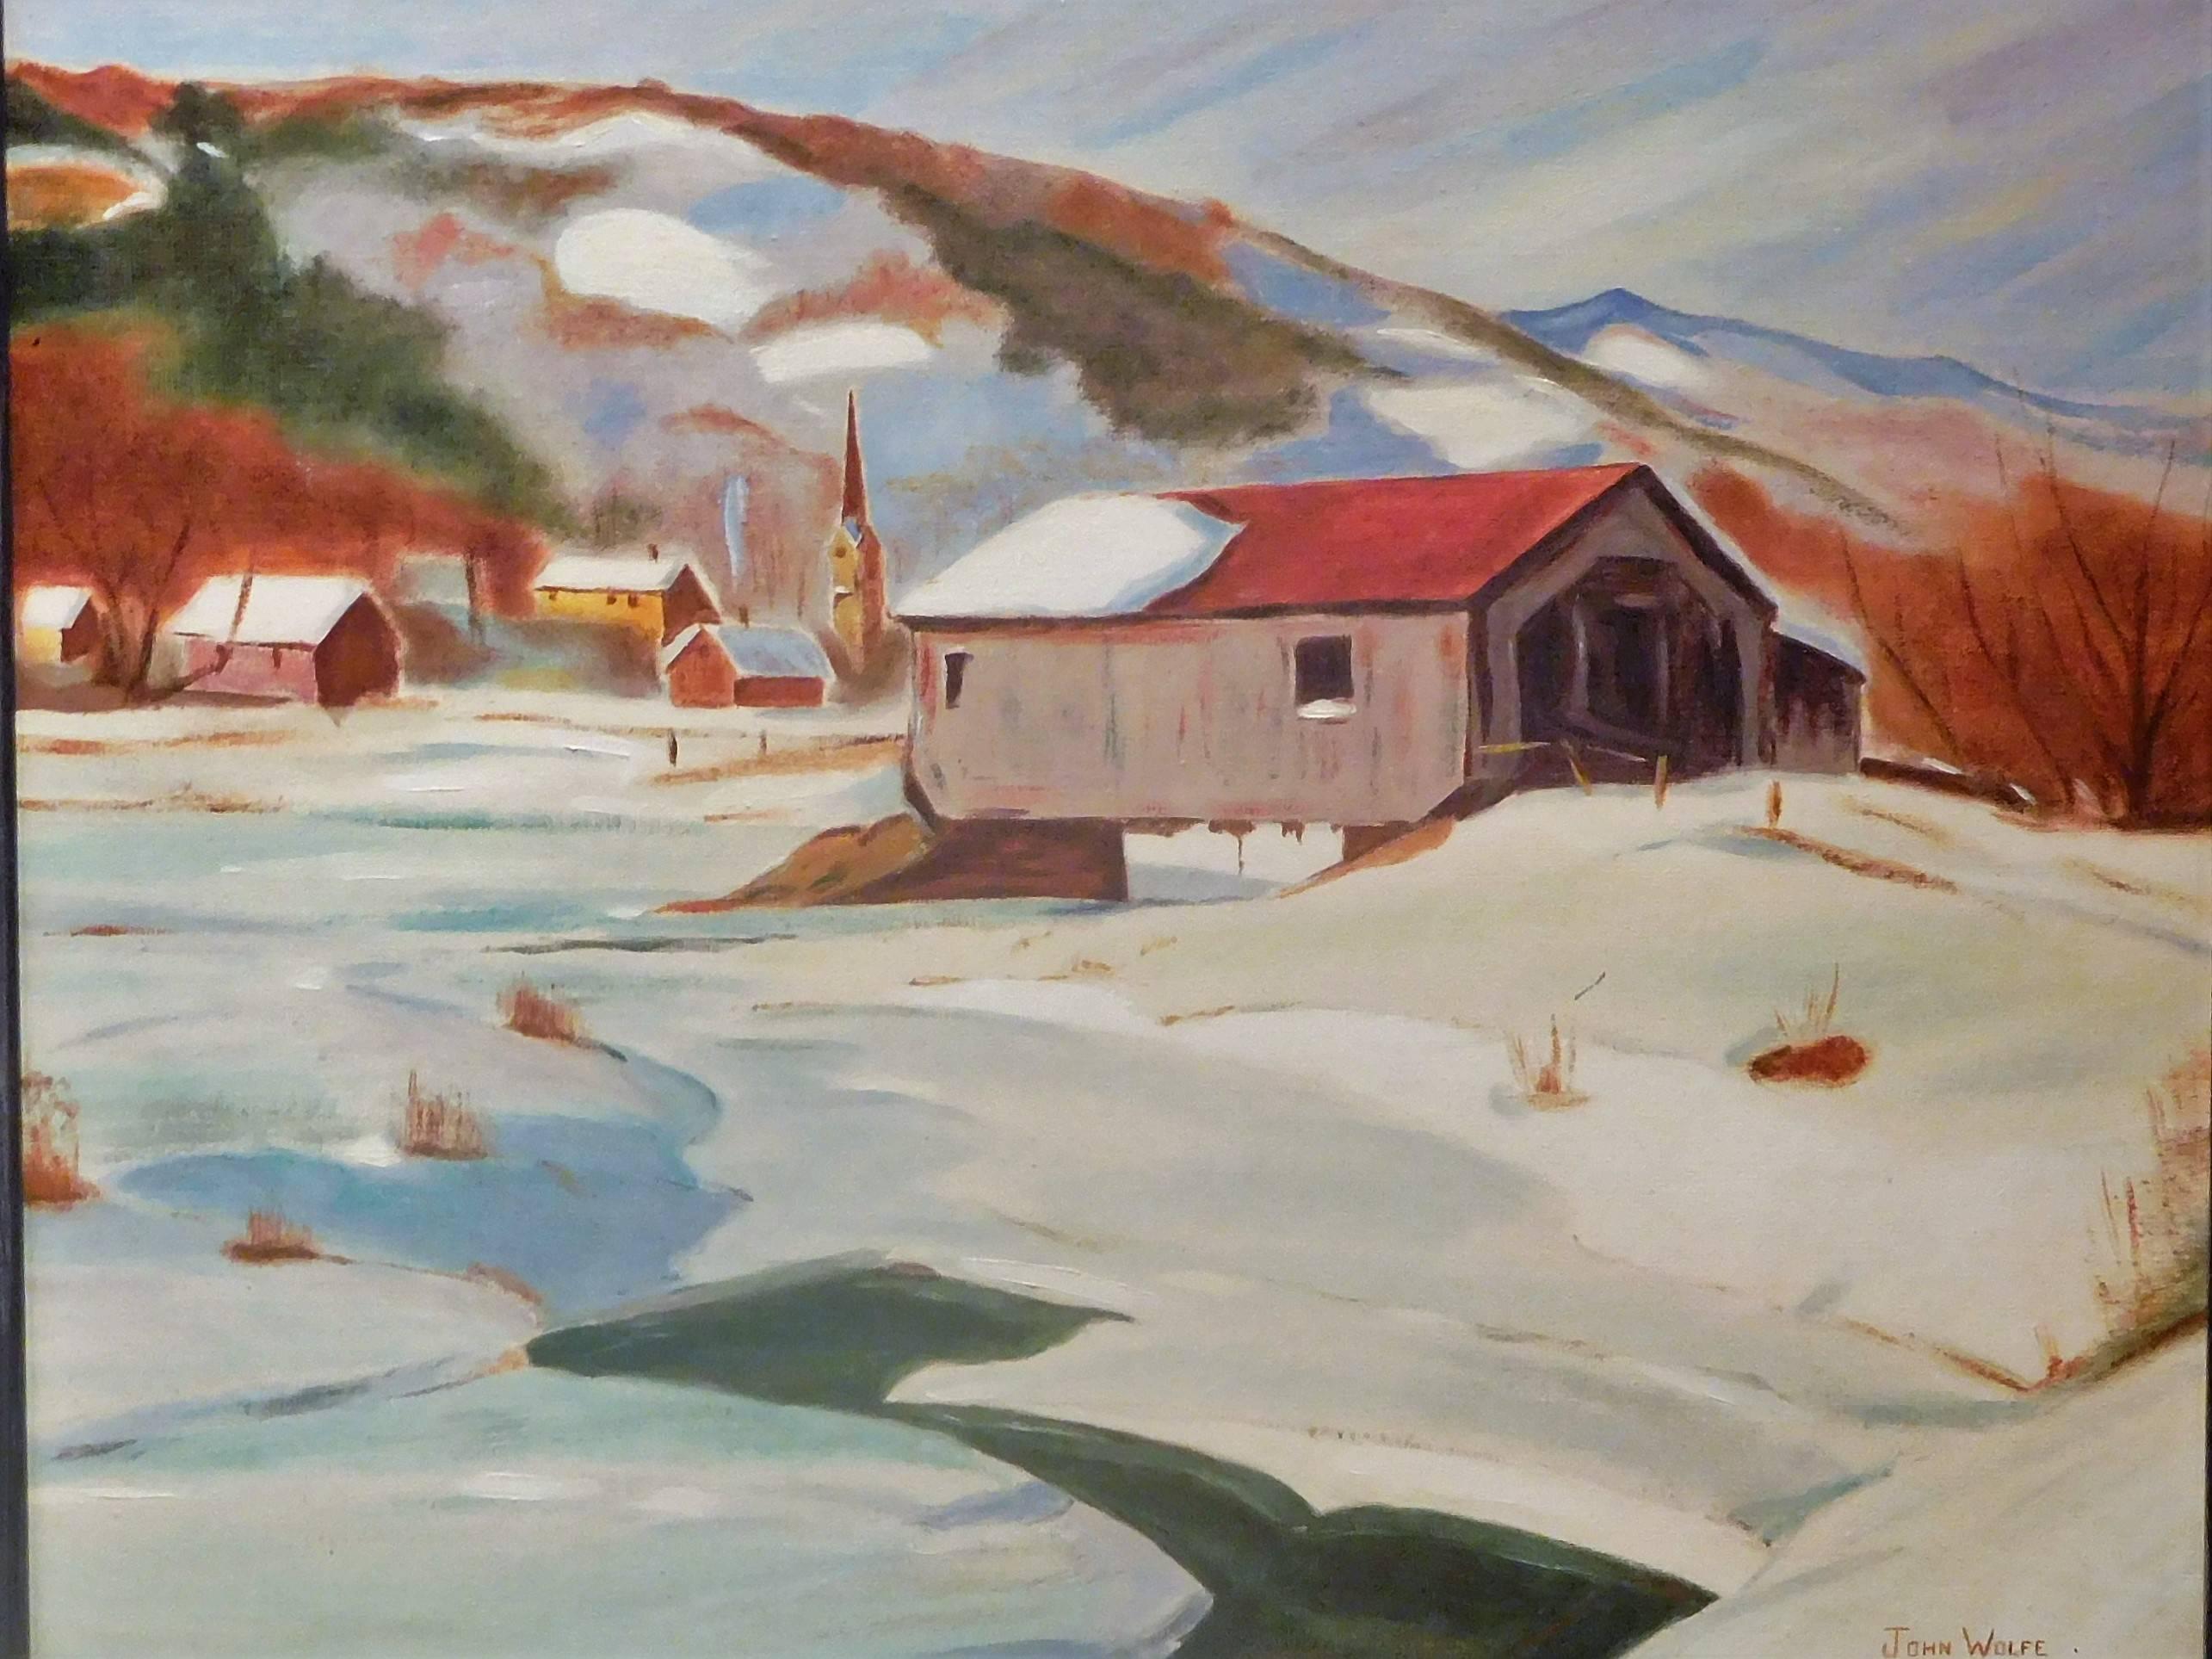 Expressionist New England Winter Day, John Wolfe, Oil Paint on Academy Board, circa 1950 For Sale